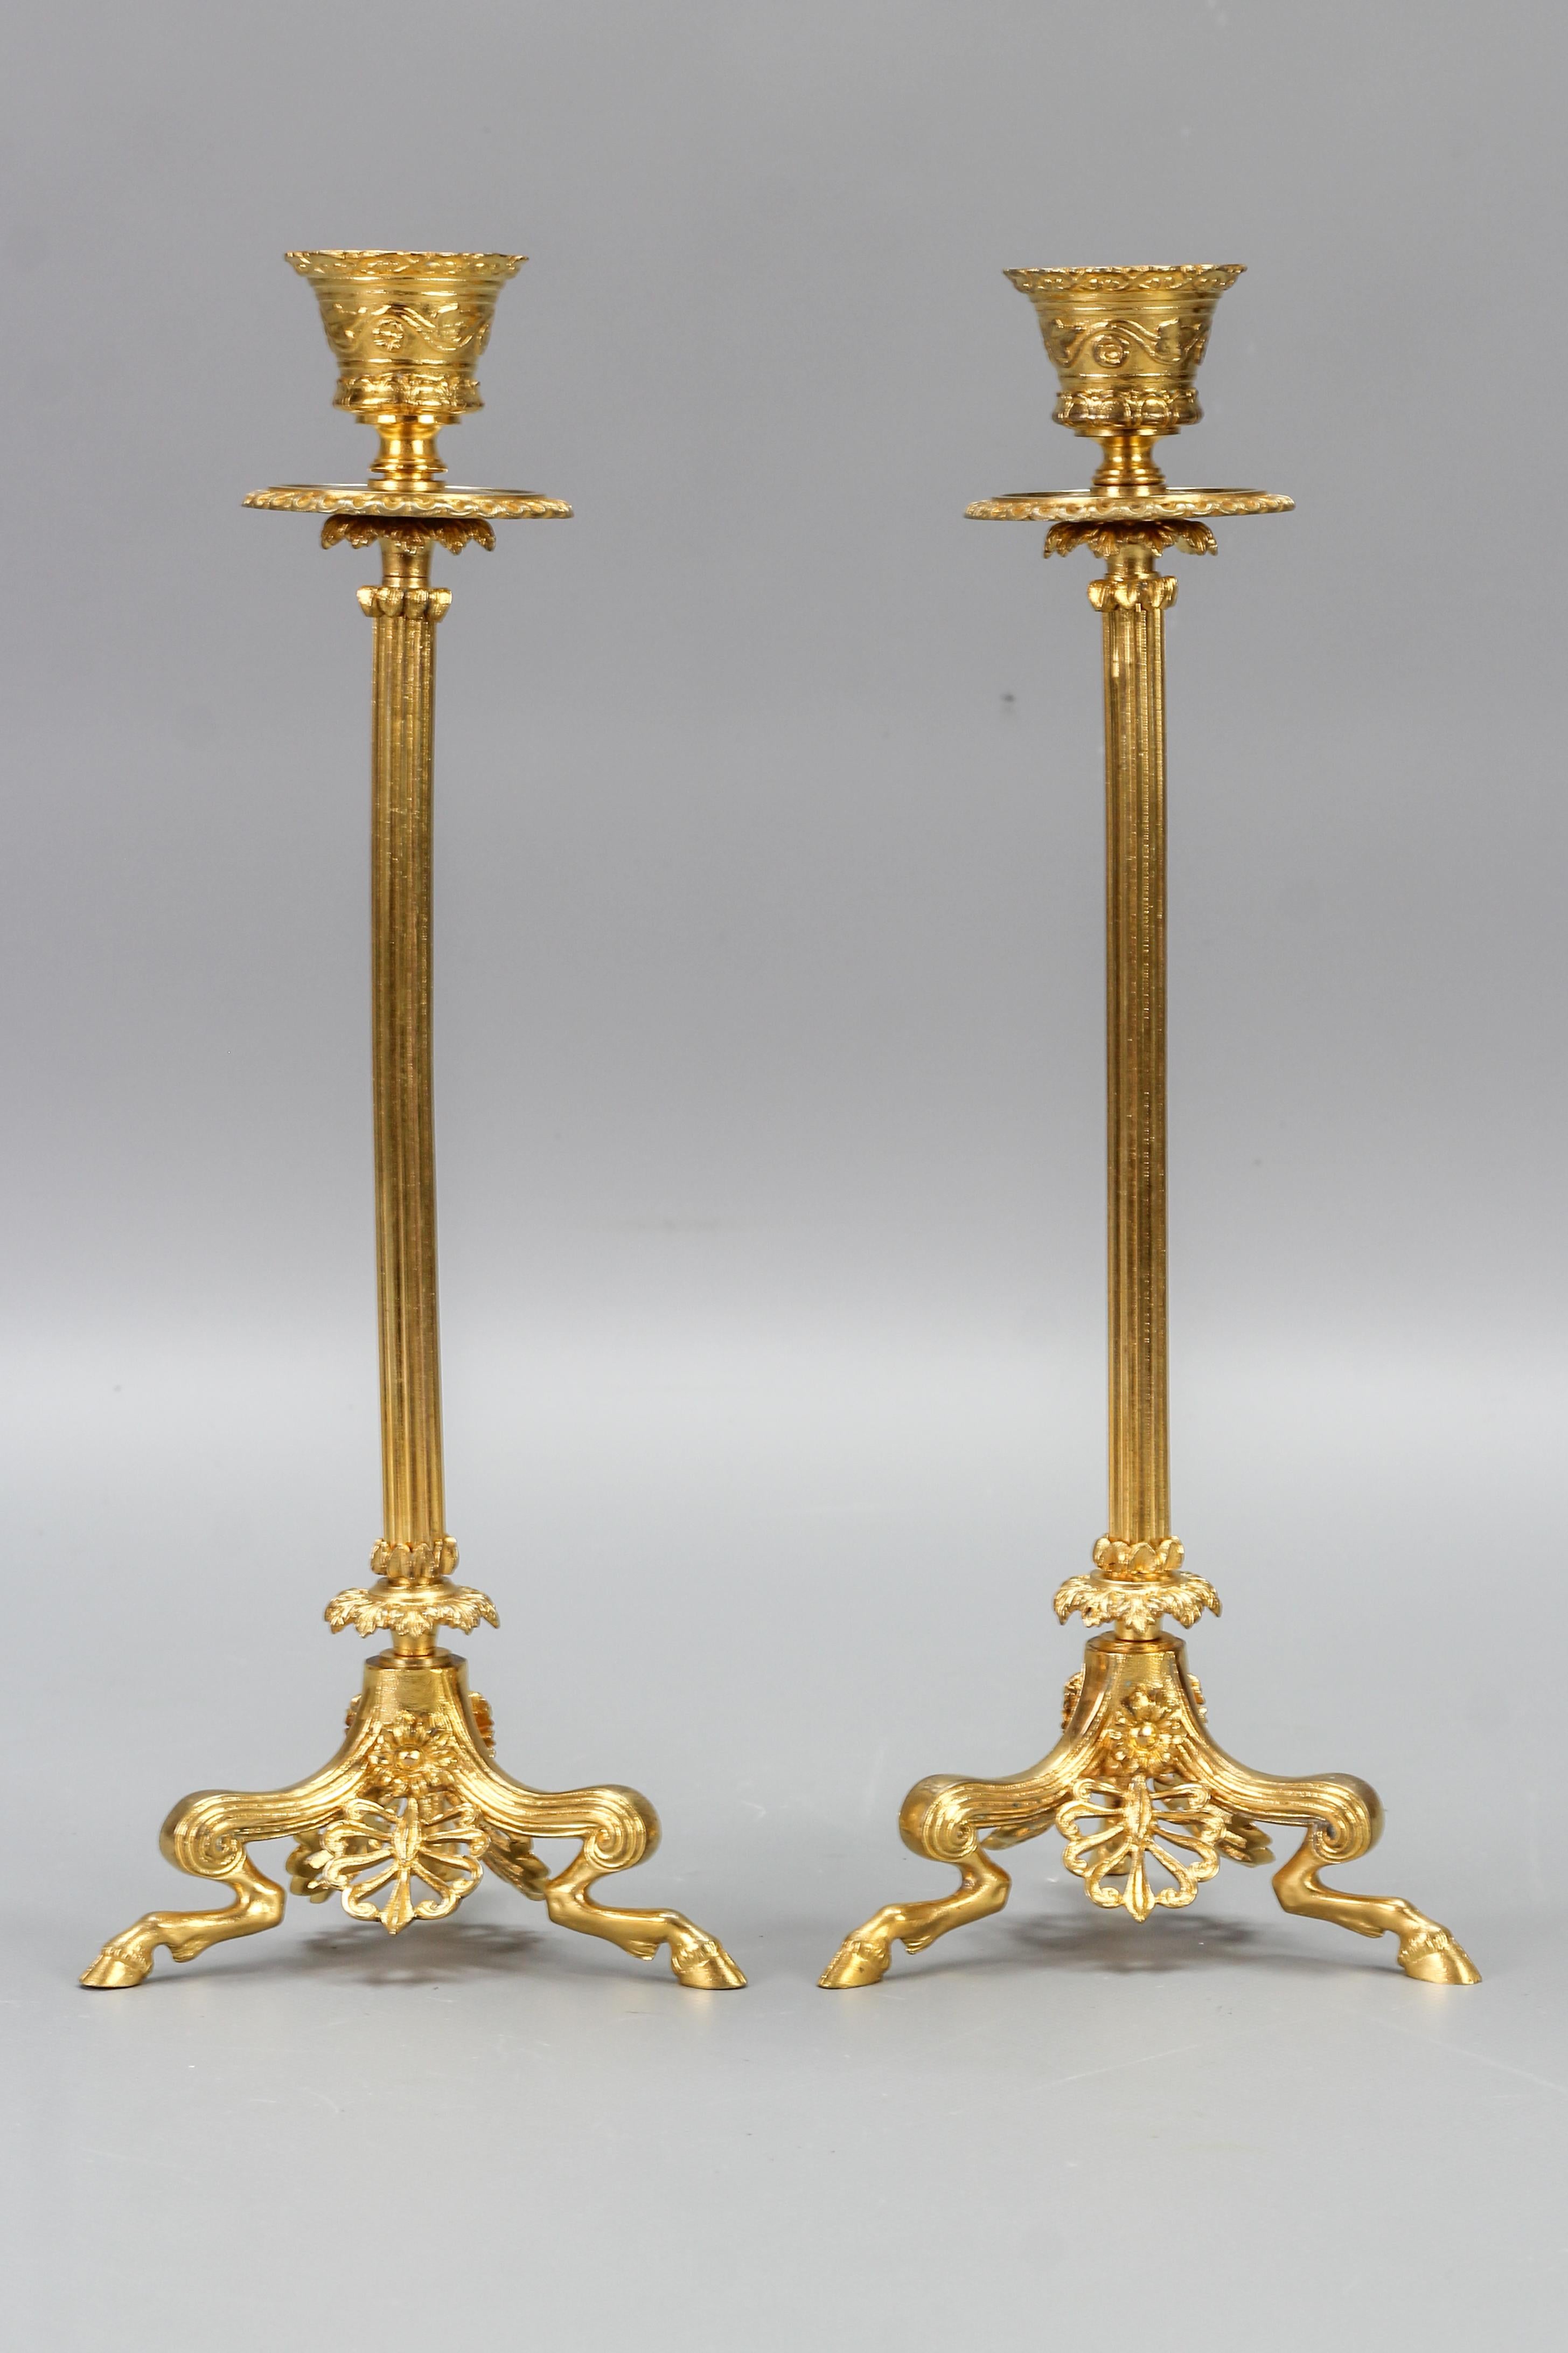 Pair of French empire style gilt bronze candlesticks on hoofed faun feet, late 19th century.
A pair of fine French Empire-style gilt bronze candleholders. A fluted column rises on three cloven-hoofed hocked faun legs and feet. These antique